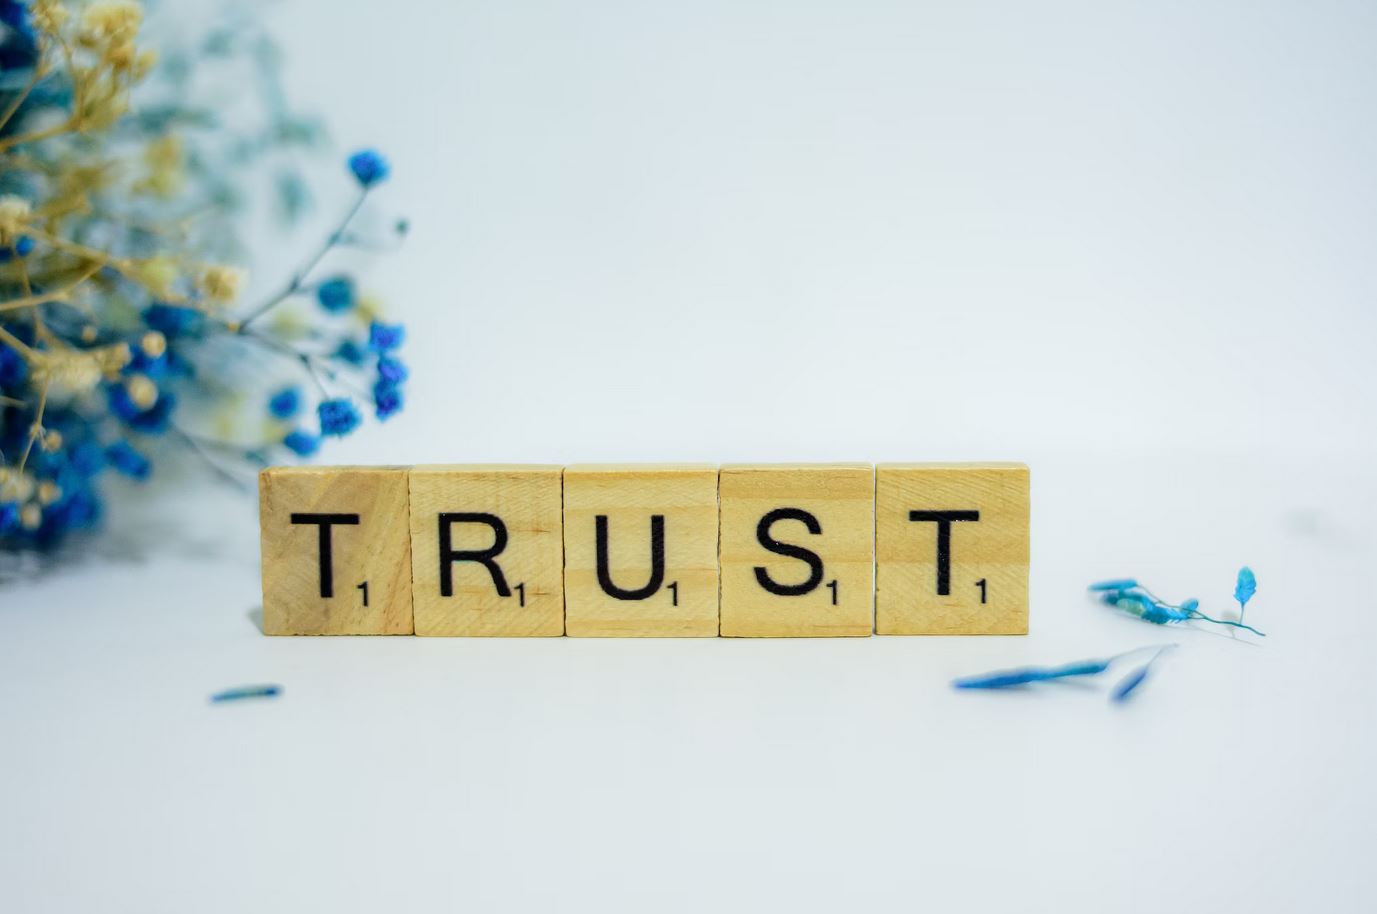 Consistent positive actions build trust over time, reinforcing the sincerity of one's intentions.